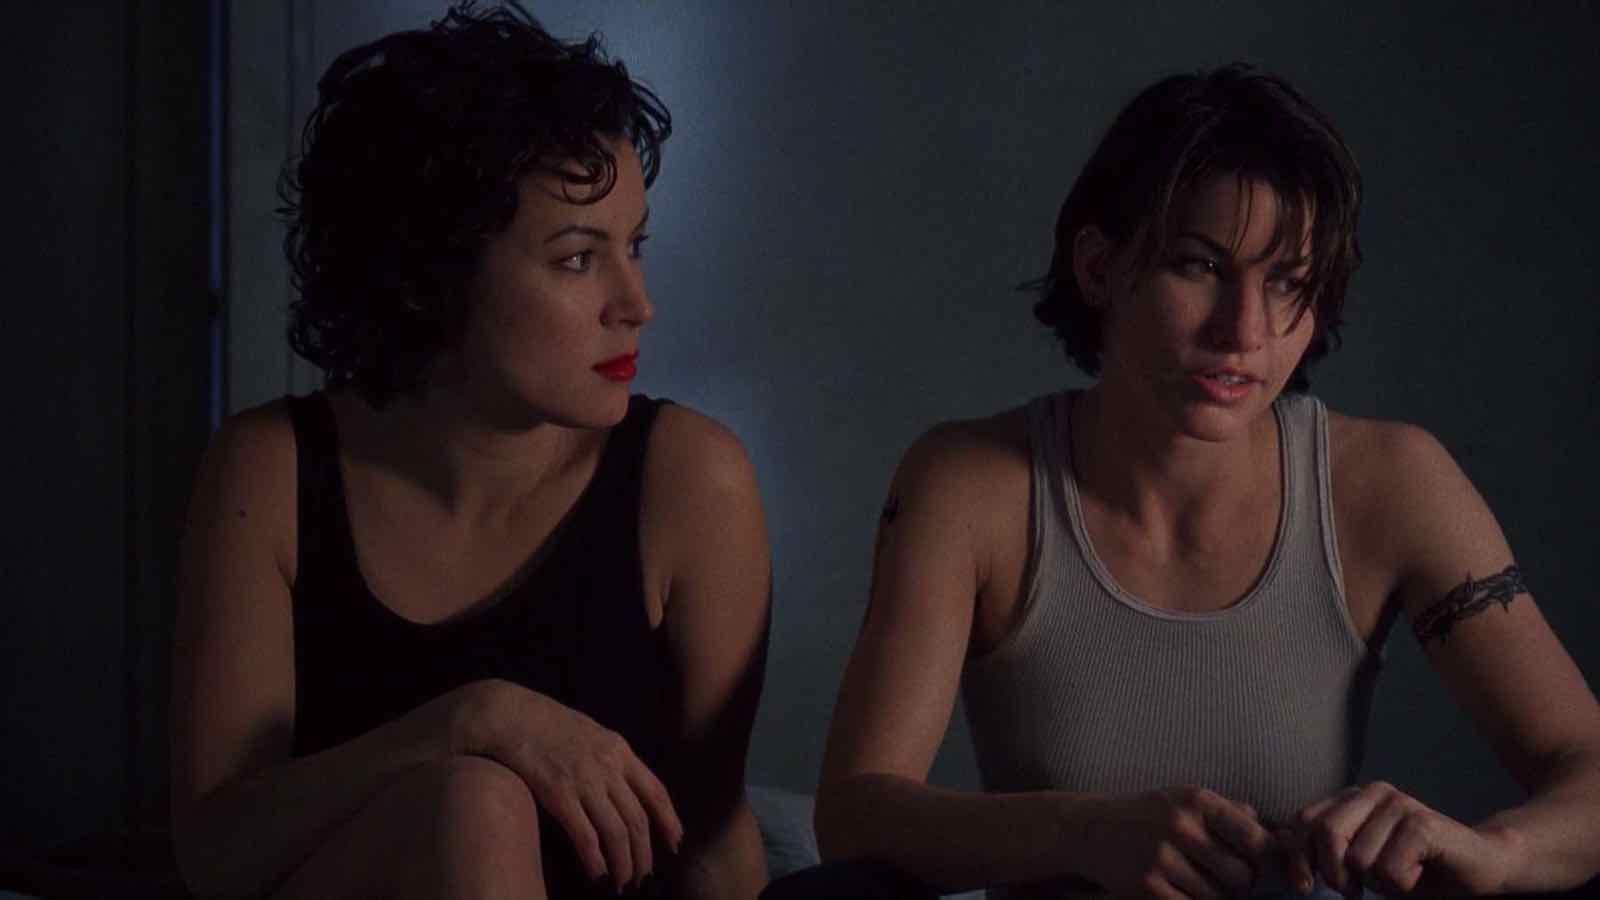 From Bound To Carol Here Are The Hottest Lesbian Sex Scenes Of All